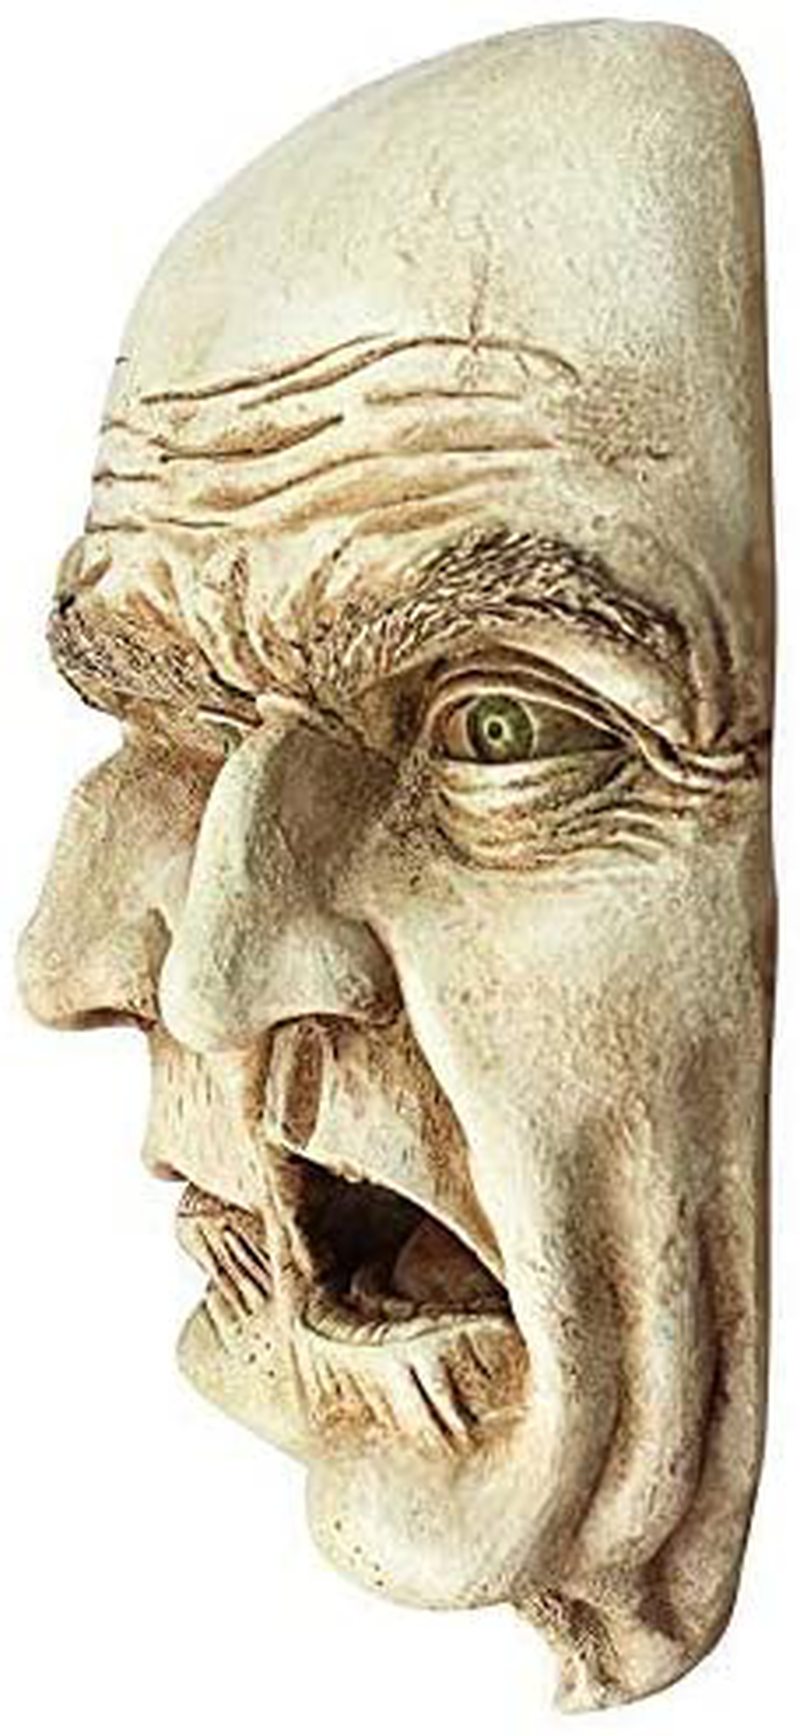 Design Toscano DB51037 Faces of a Nightmare Gothic Wall Sculpture, 10 Inch, Polyresin, Ancient Ivory